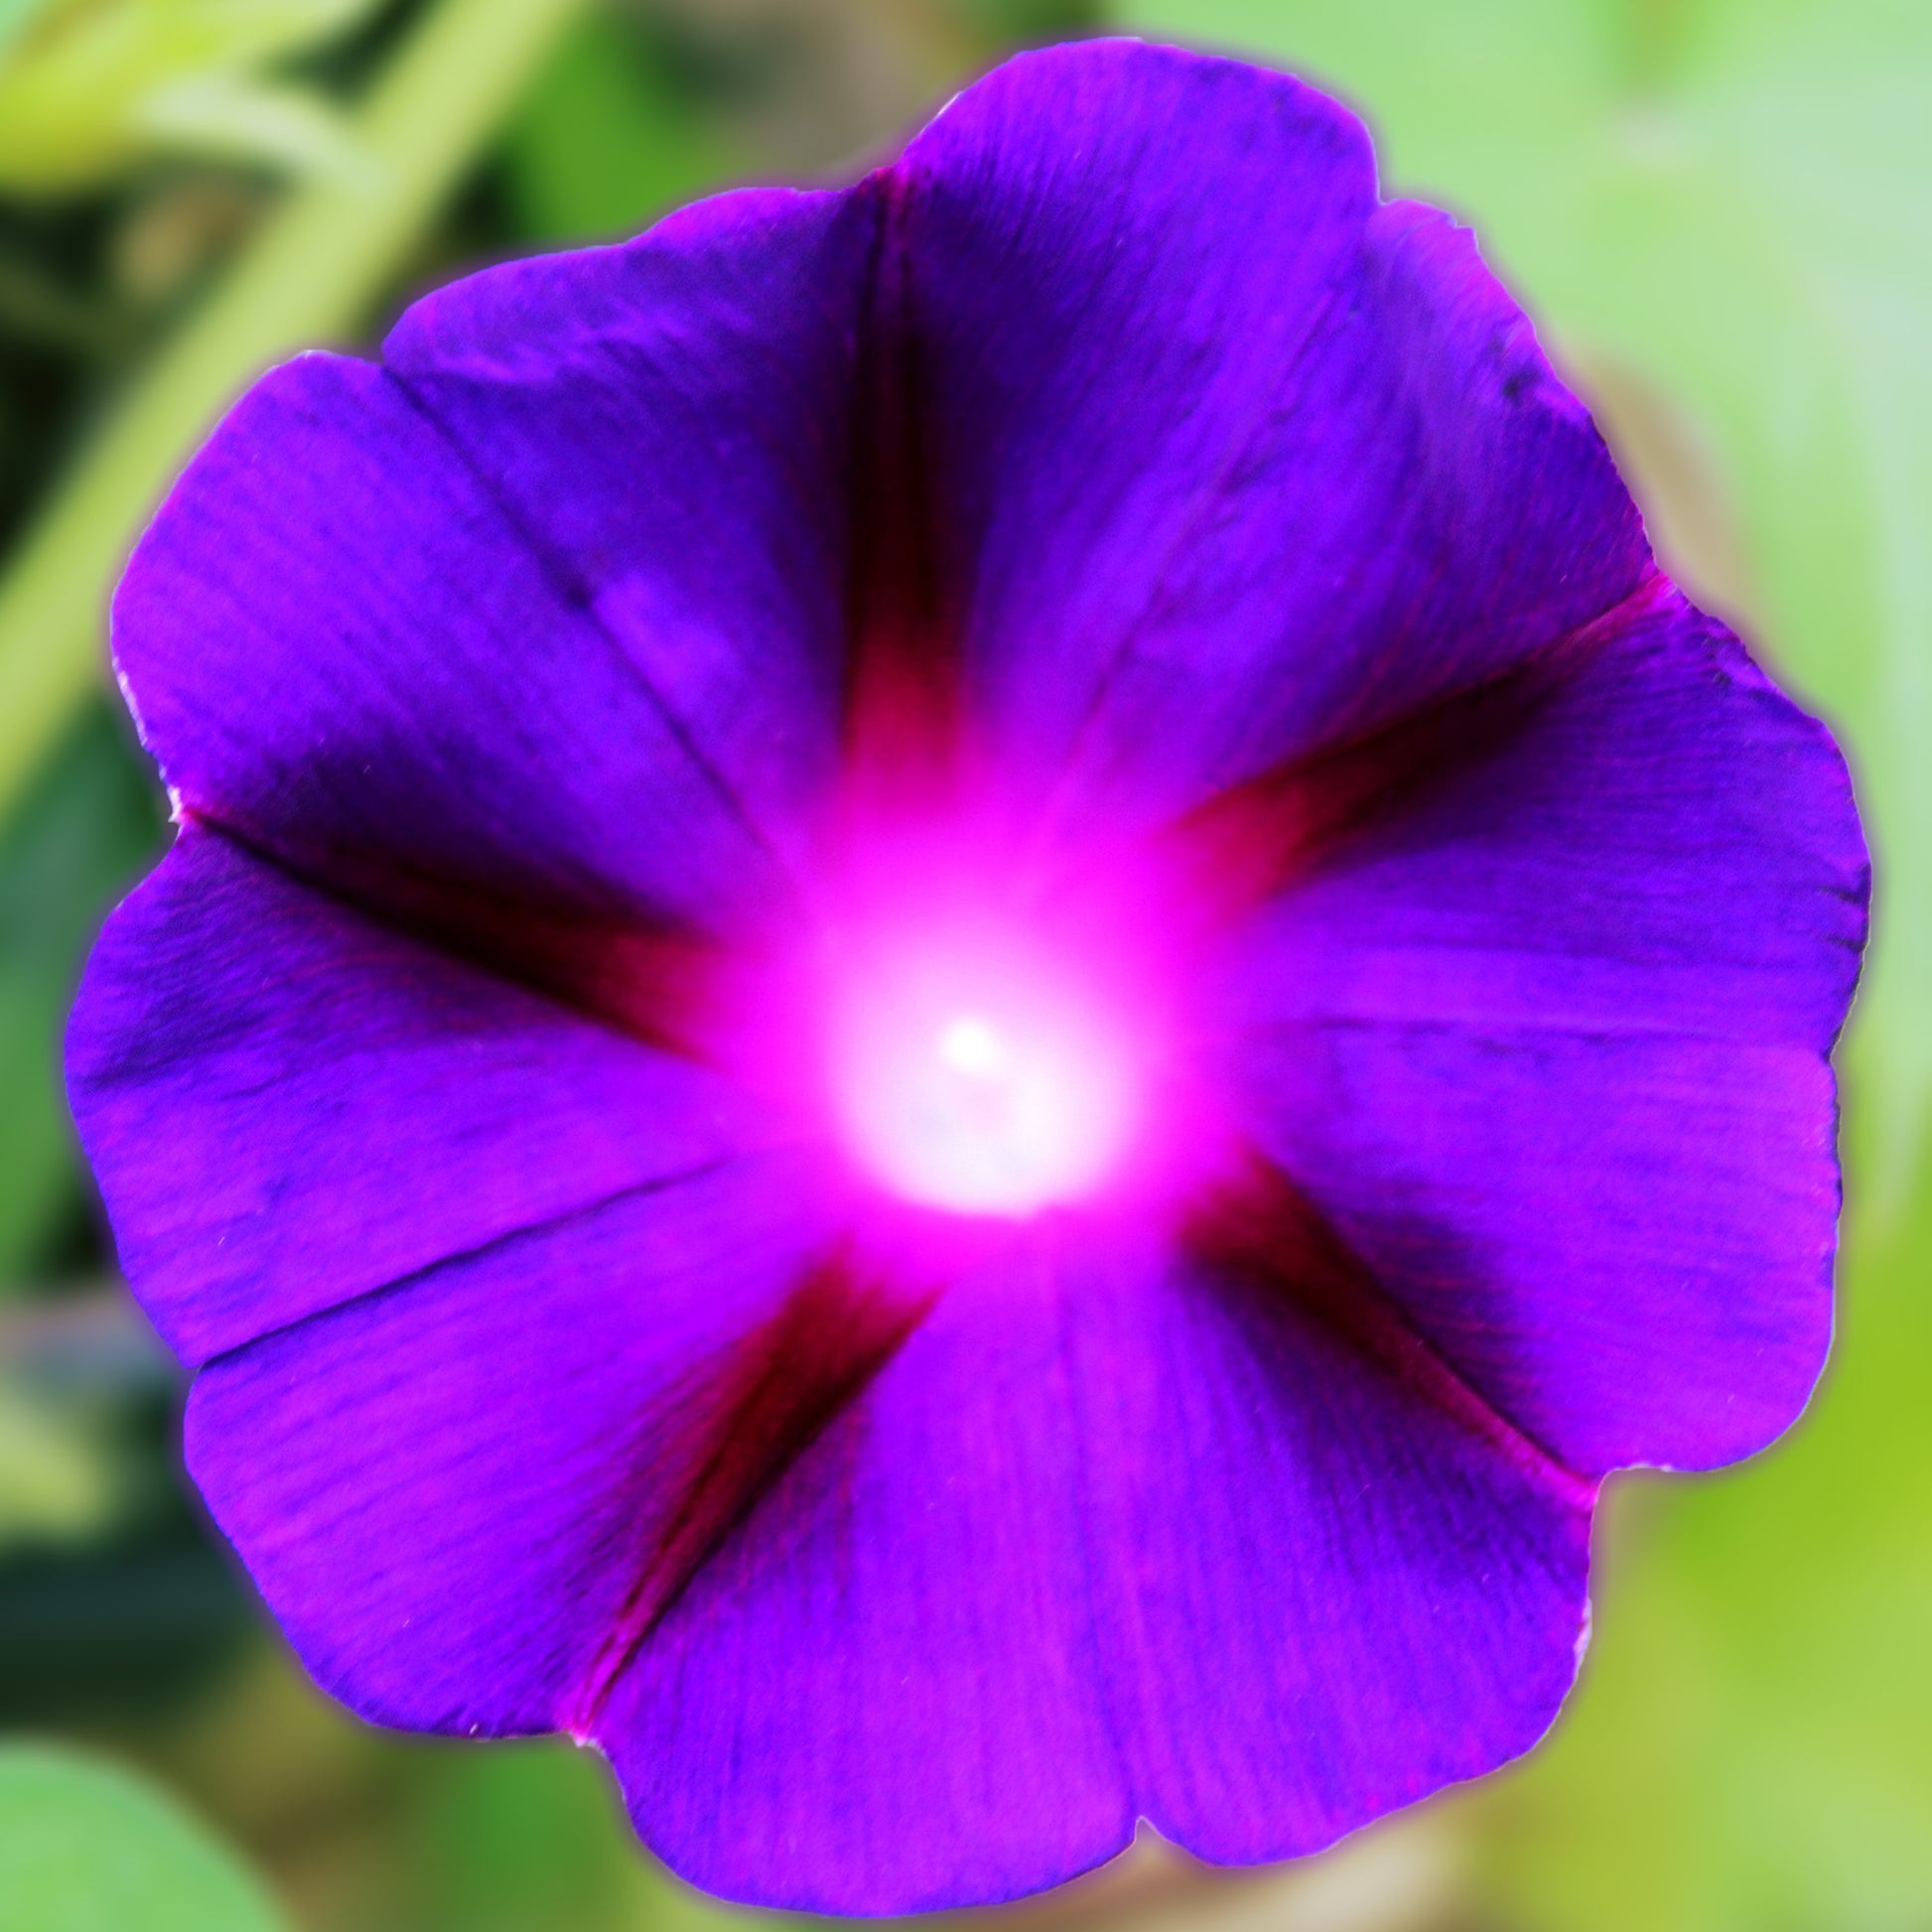 Grandpa Ott Morning Glory Flower seeds fully matured and blooming their dramatic deep purple, trumpet-shaped blooms.